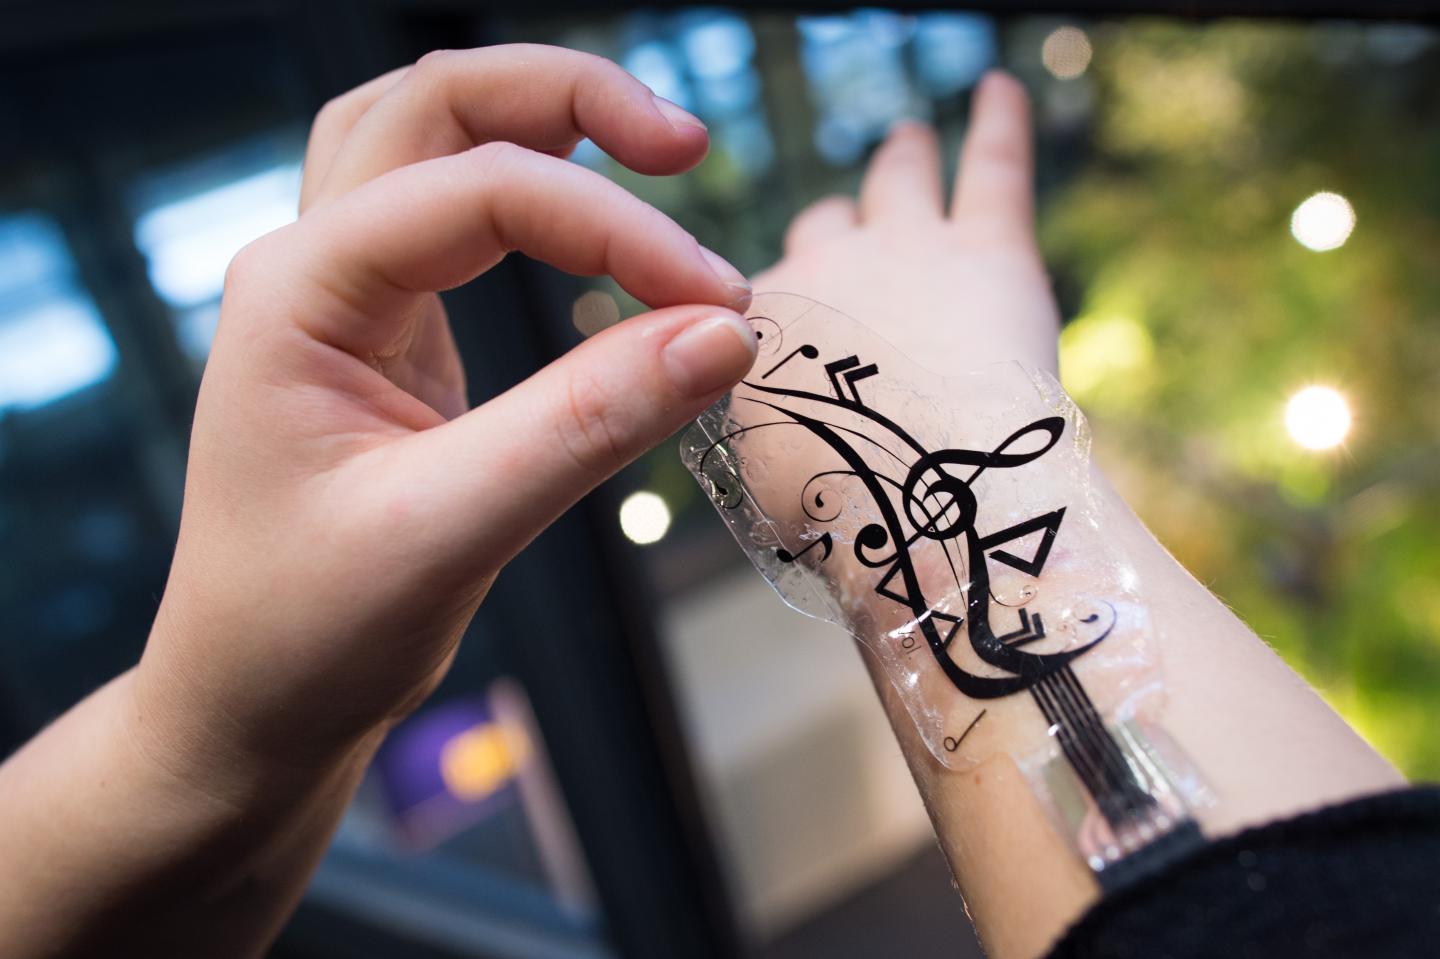 Control Your Smartphone With Stickers On Your Skin